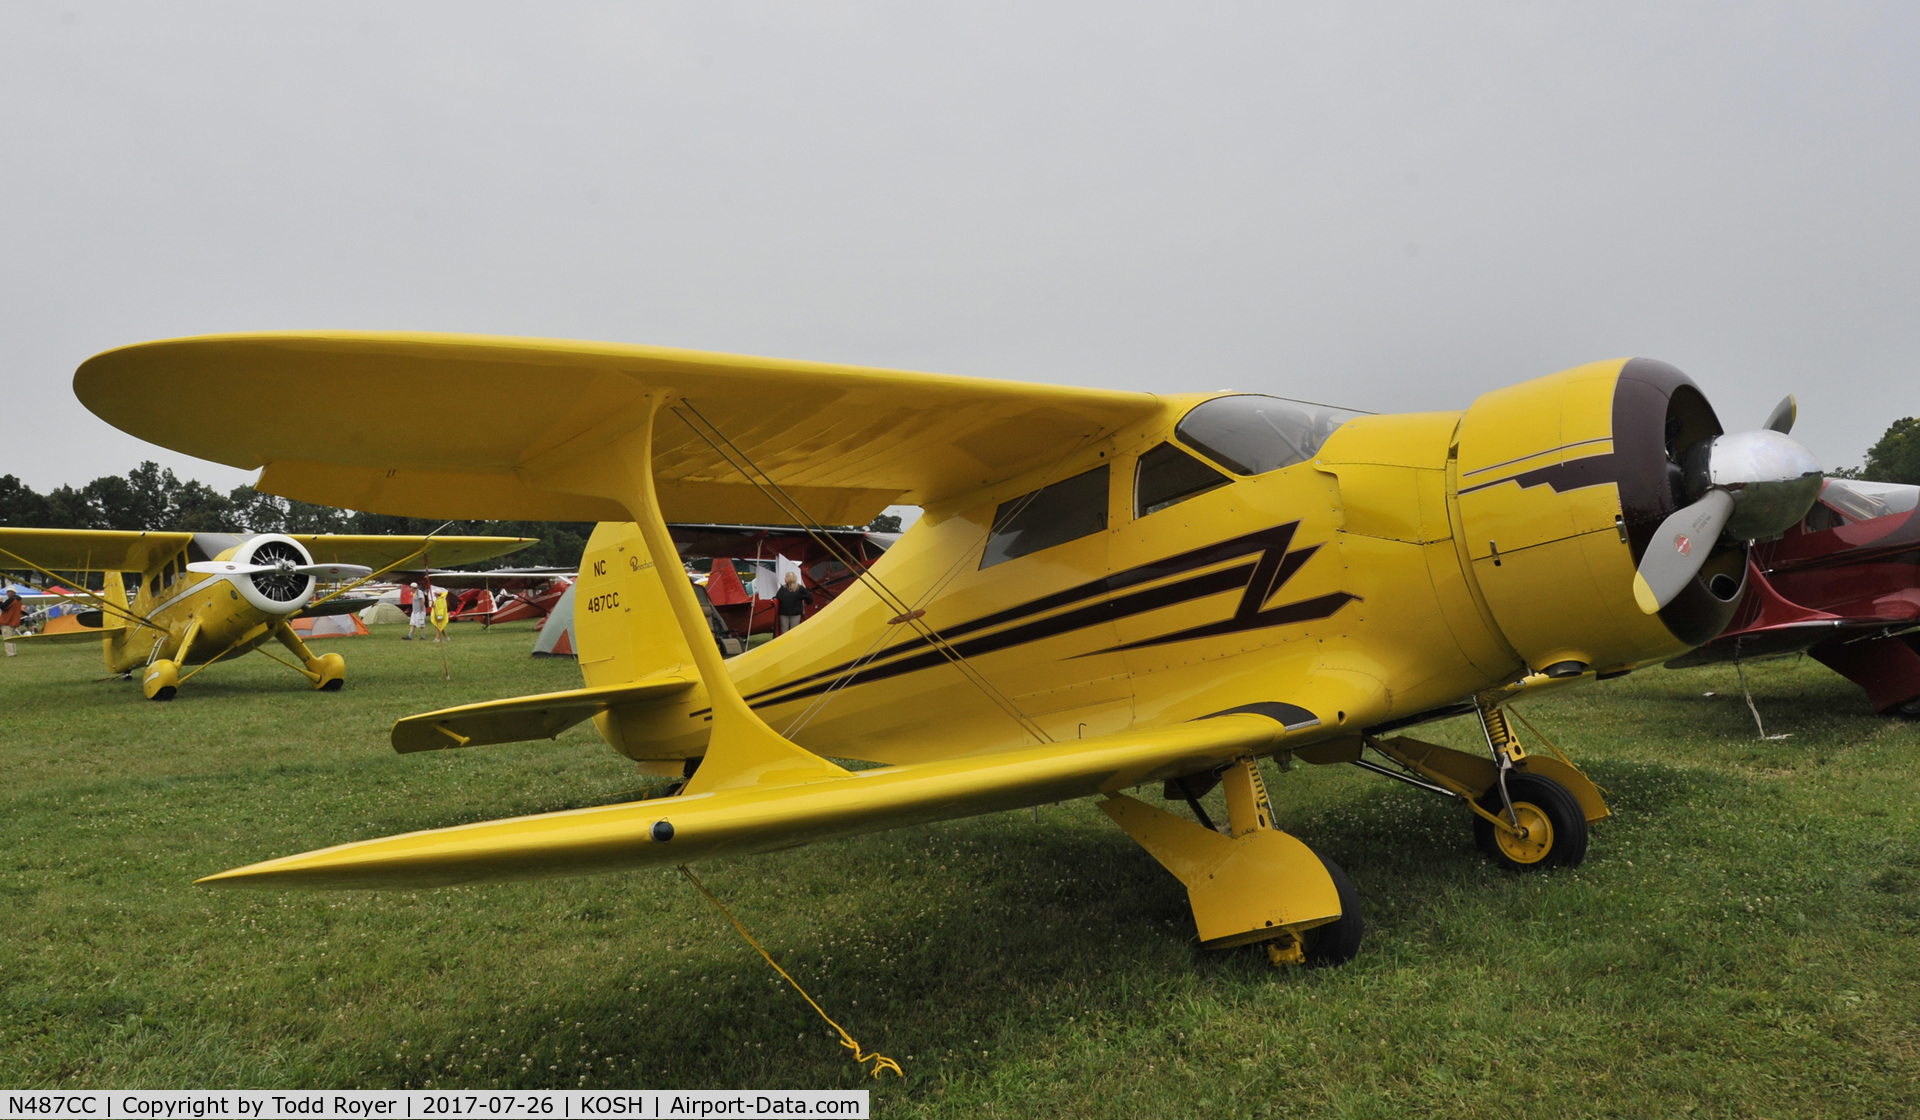 N487CC, 1943 Beech D17S Staggerwing C/N 4837, Airventure 2017